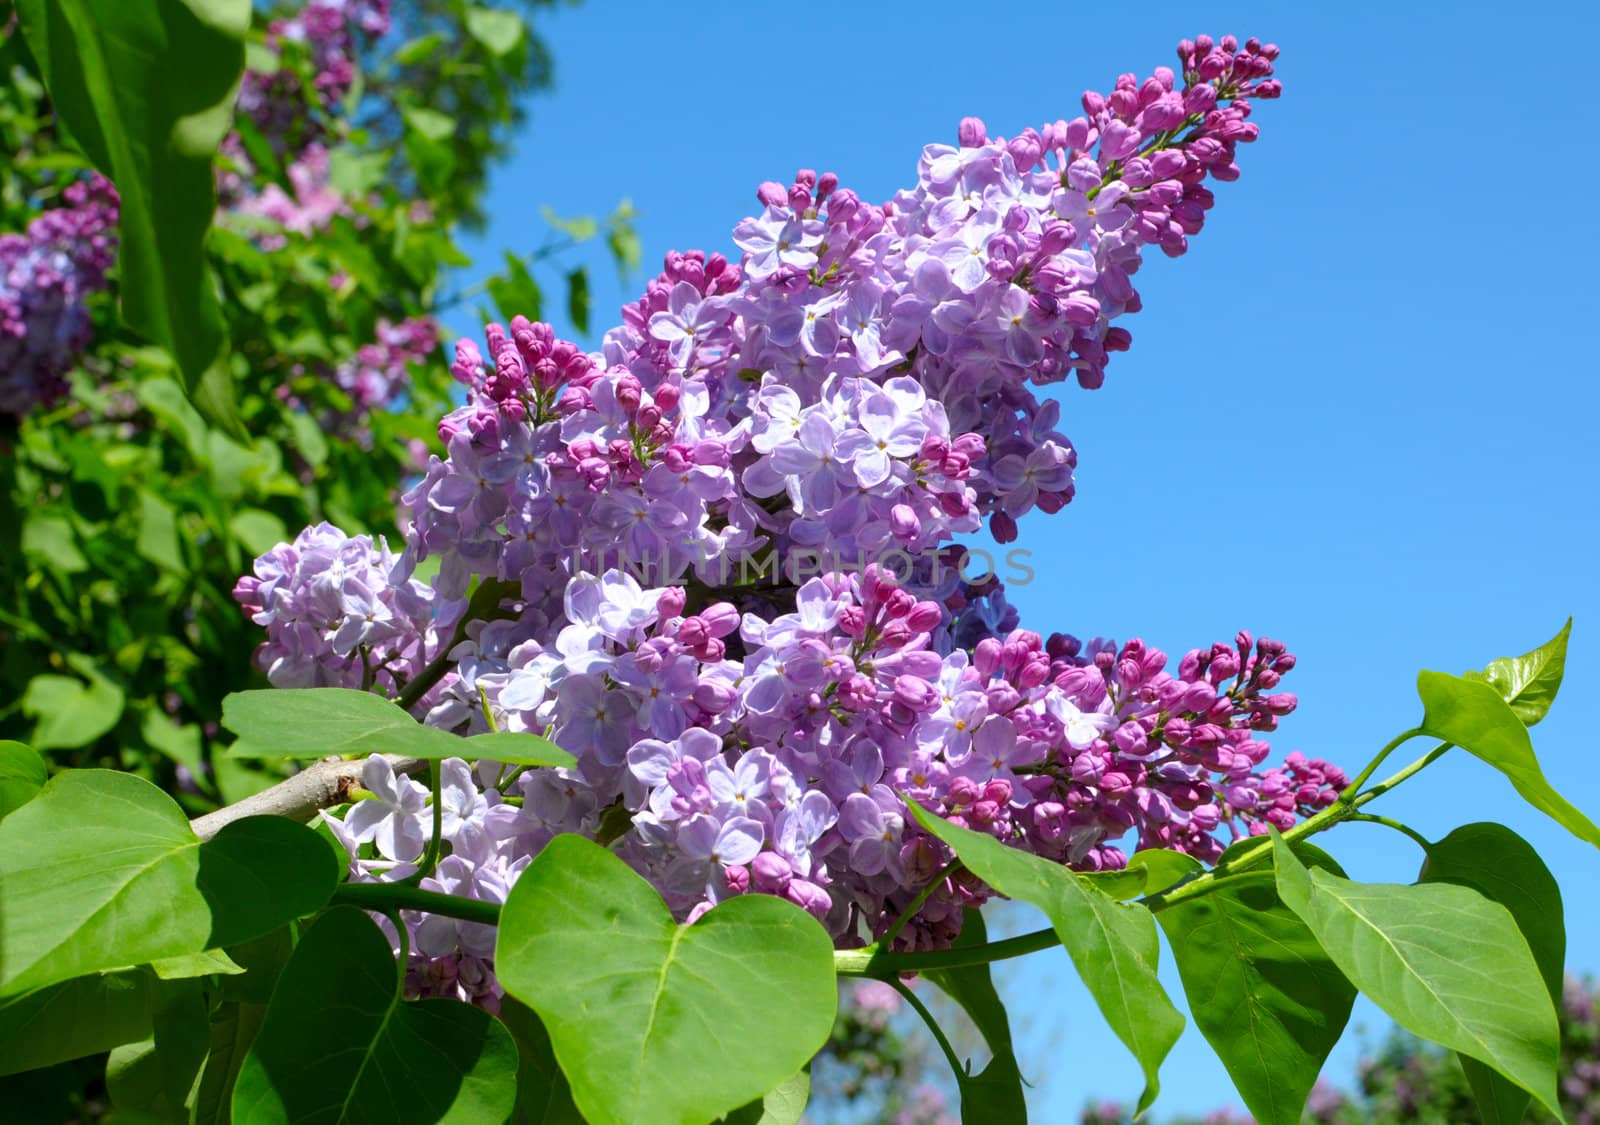 purple lilac bush blooming in May day by DNKSTUDIO